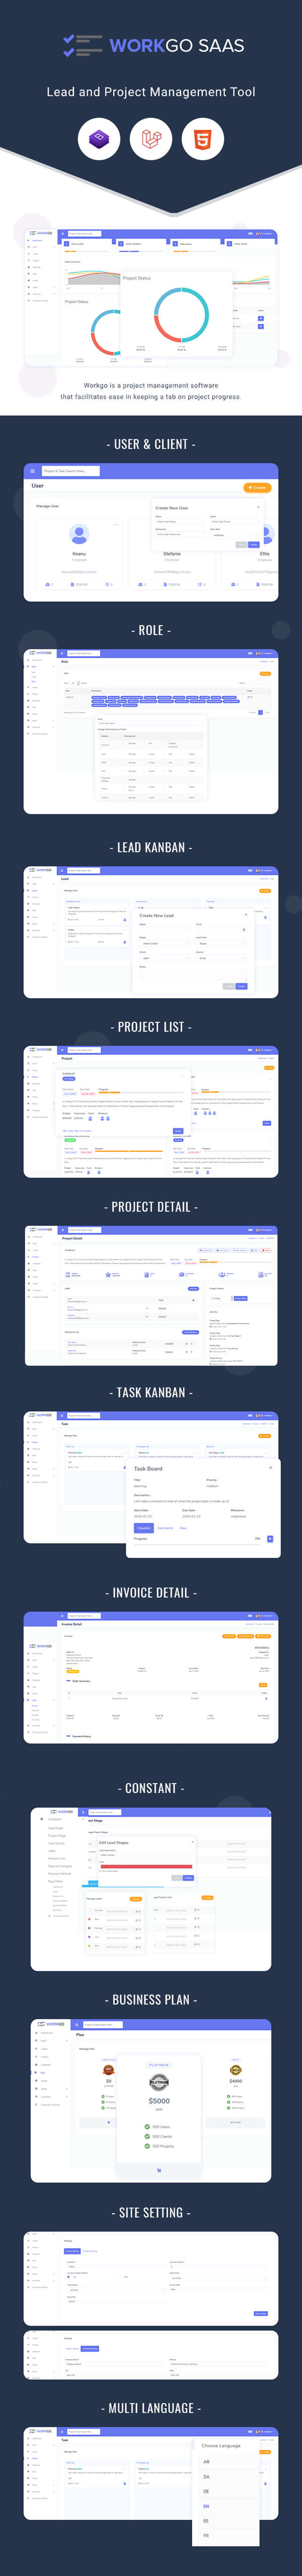 WorkGo SaaS - Lead and Project Management Tool - 4